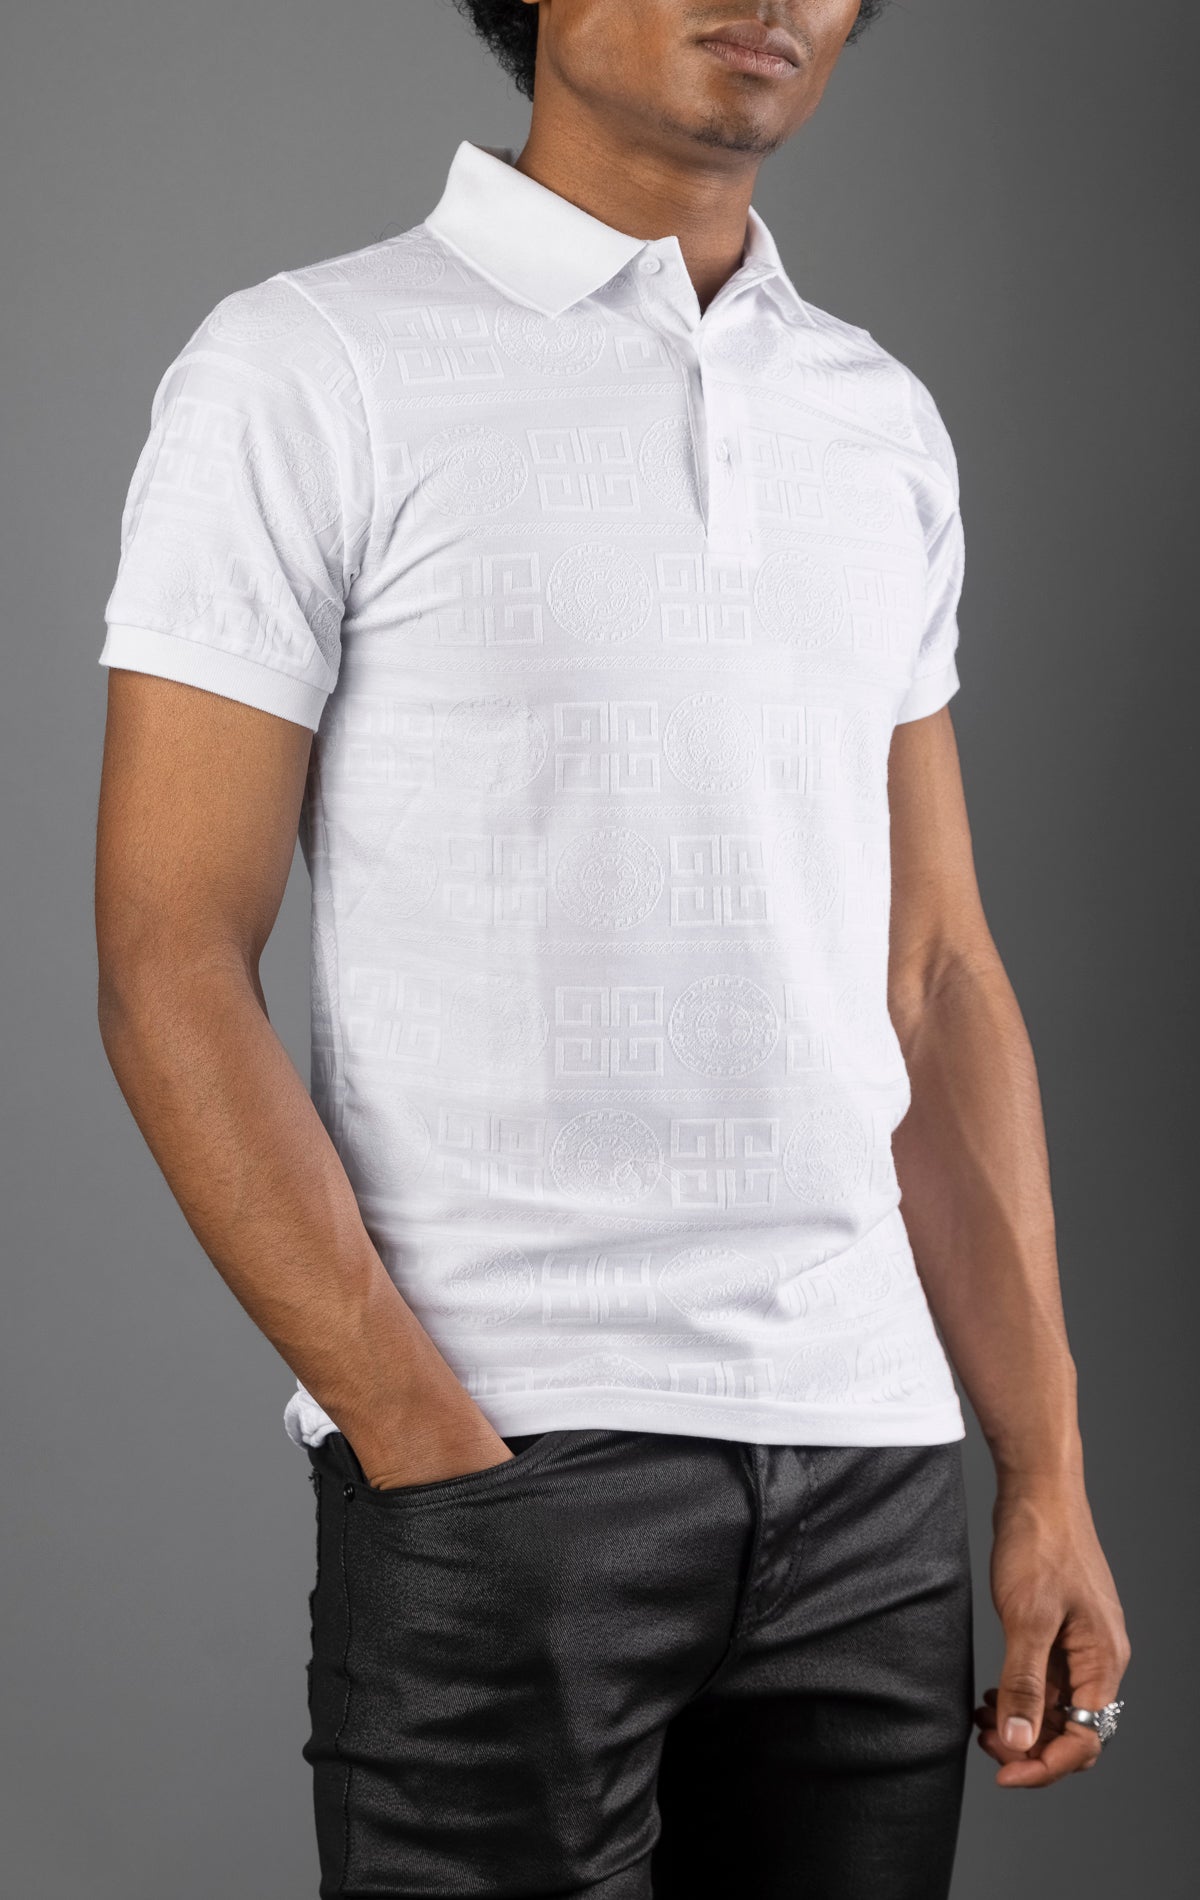 White Men's regular-fit, short-sleeve polo shirt. The shirt features a seamless Greek pattern and a classic polo design